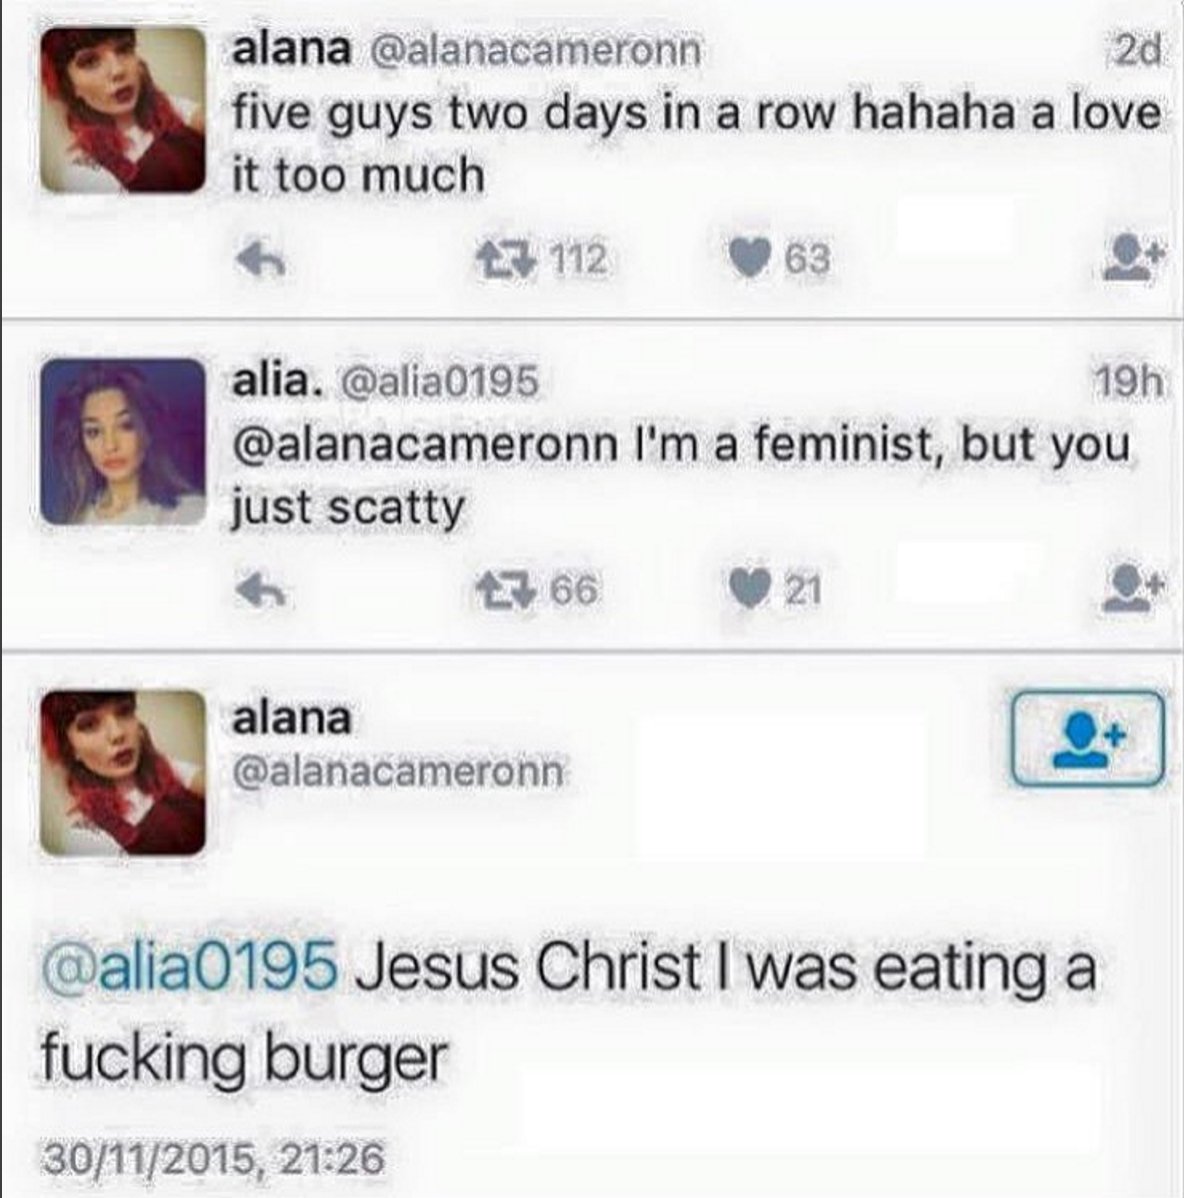 five guys in two days tweet - alana 20 five guys two days in a row hahaha a love it too much 27 112 63 alia. 19h I'm a feminist, but you just scatty 66 21 alana Jesus Christ I was eating a fucking burger 30112015,